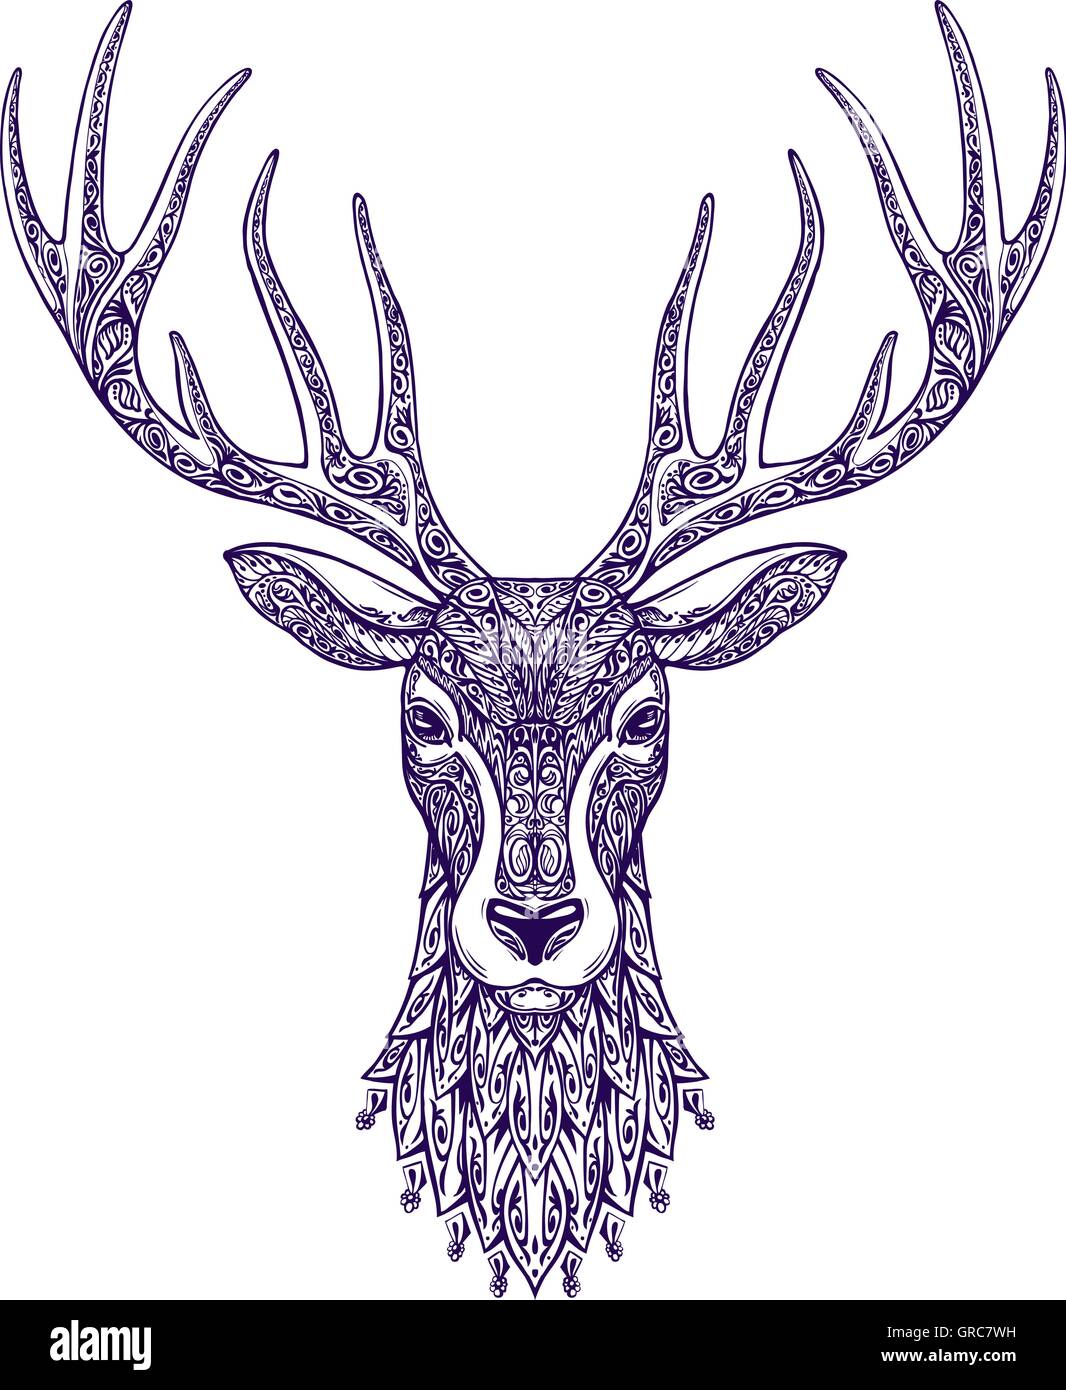 Deer head isolated on white background. Hand drawn vector illustration with floral elements Stock Vector